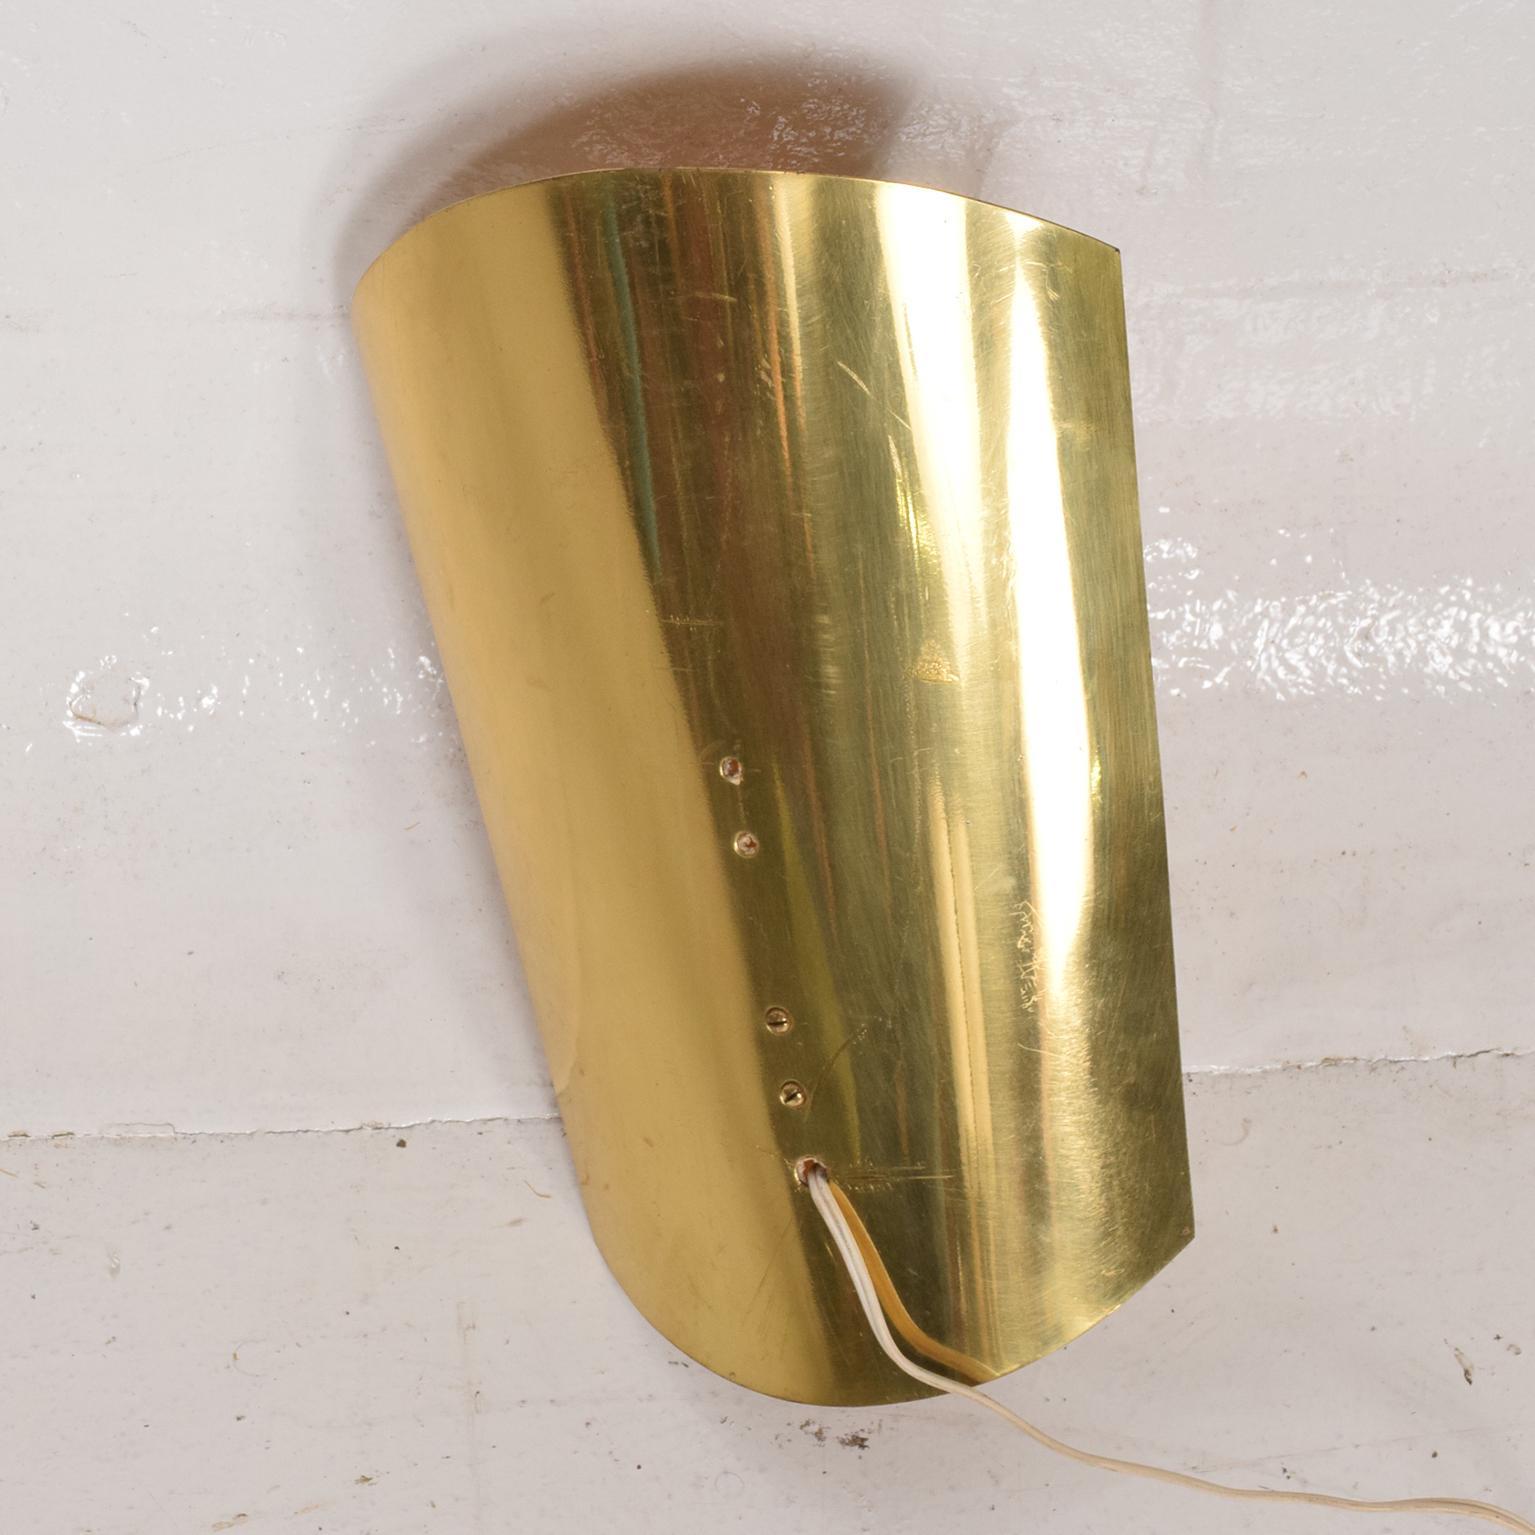 For your consideration, a Mid-Century Modern shield sconce, Italian modernist. Made in Italy circa the 1950s. Original vintage patina. Dimensions: 12 1/4